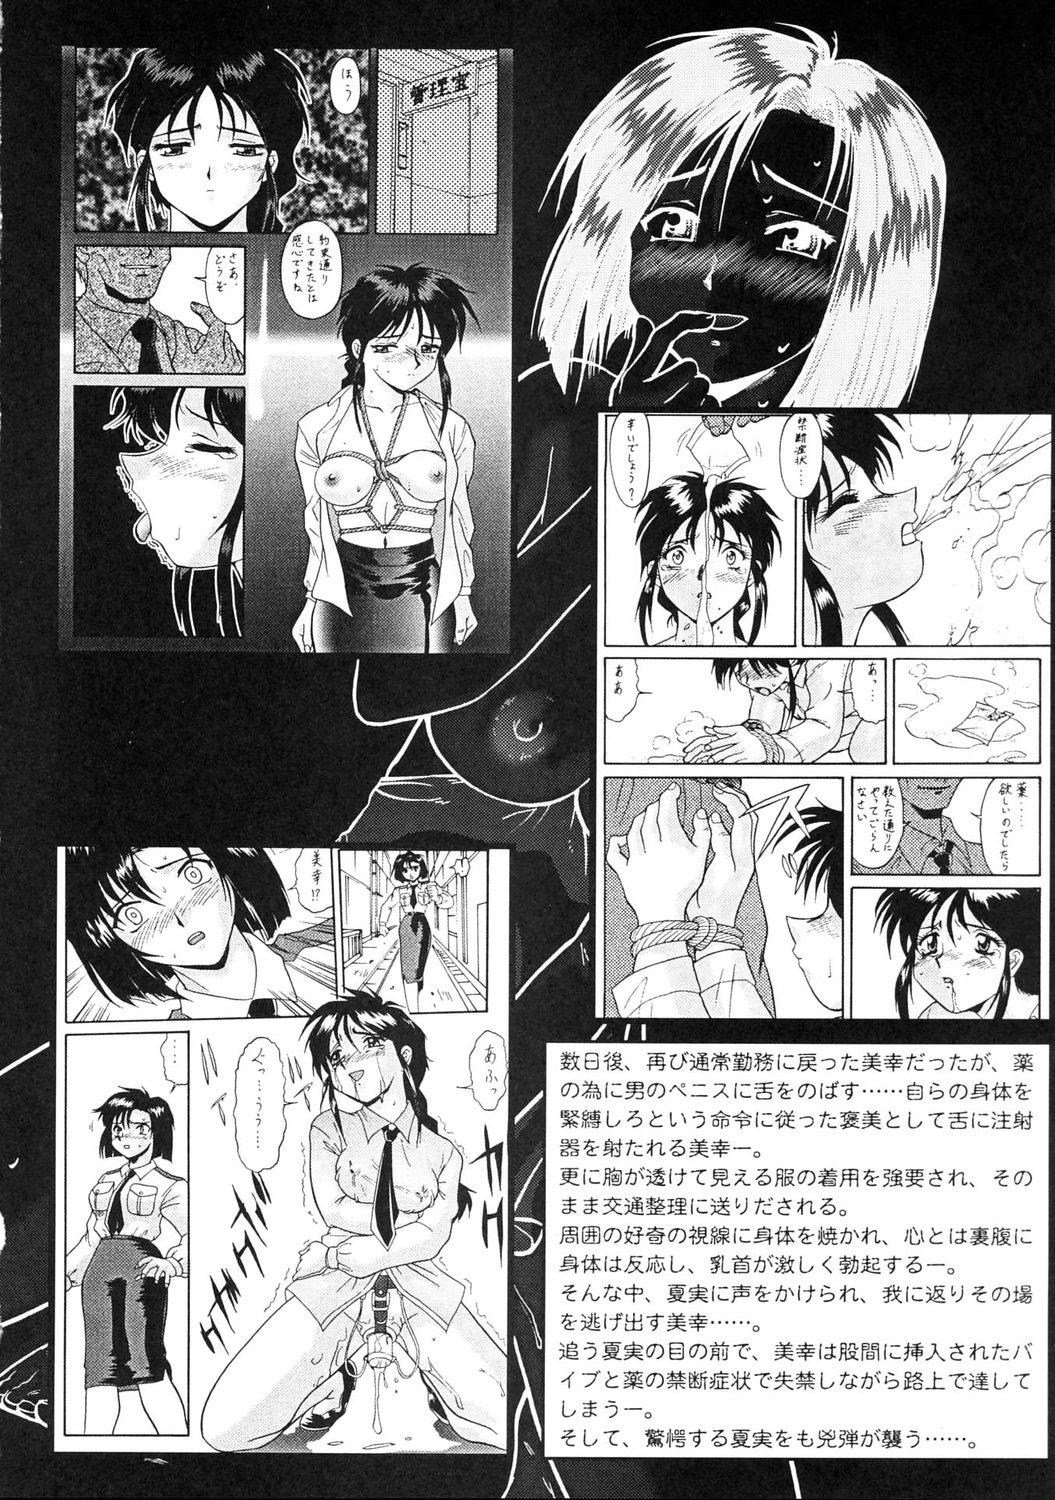 Euro Taiho Shichauzo The Doujin Vol. 5 - Youre under arrest Hidden Camera - Page 5